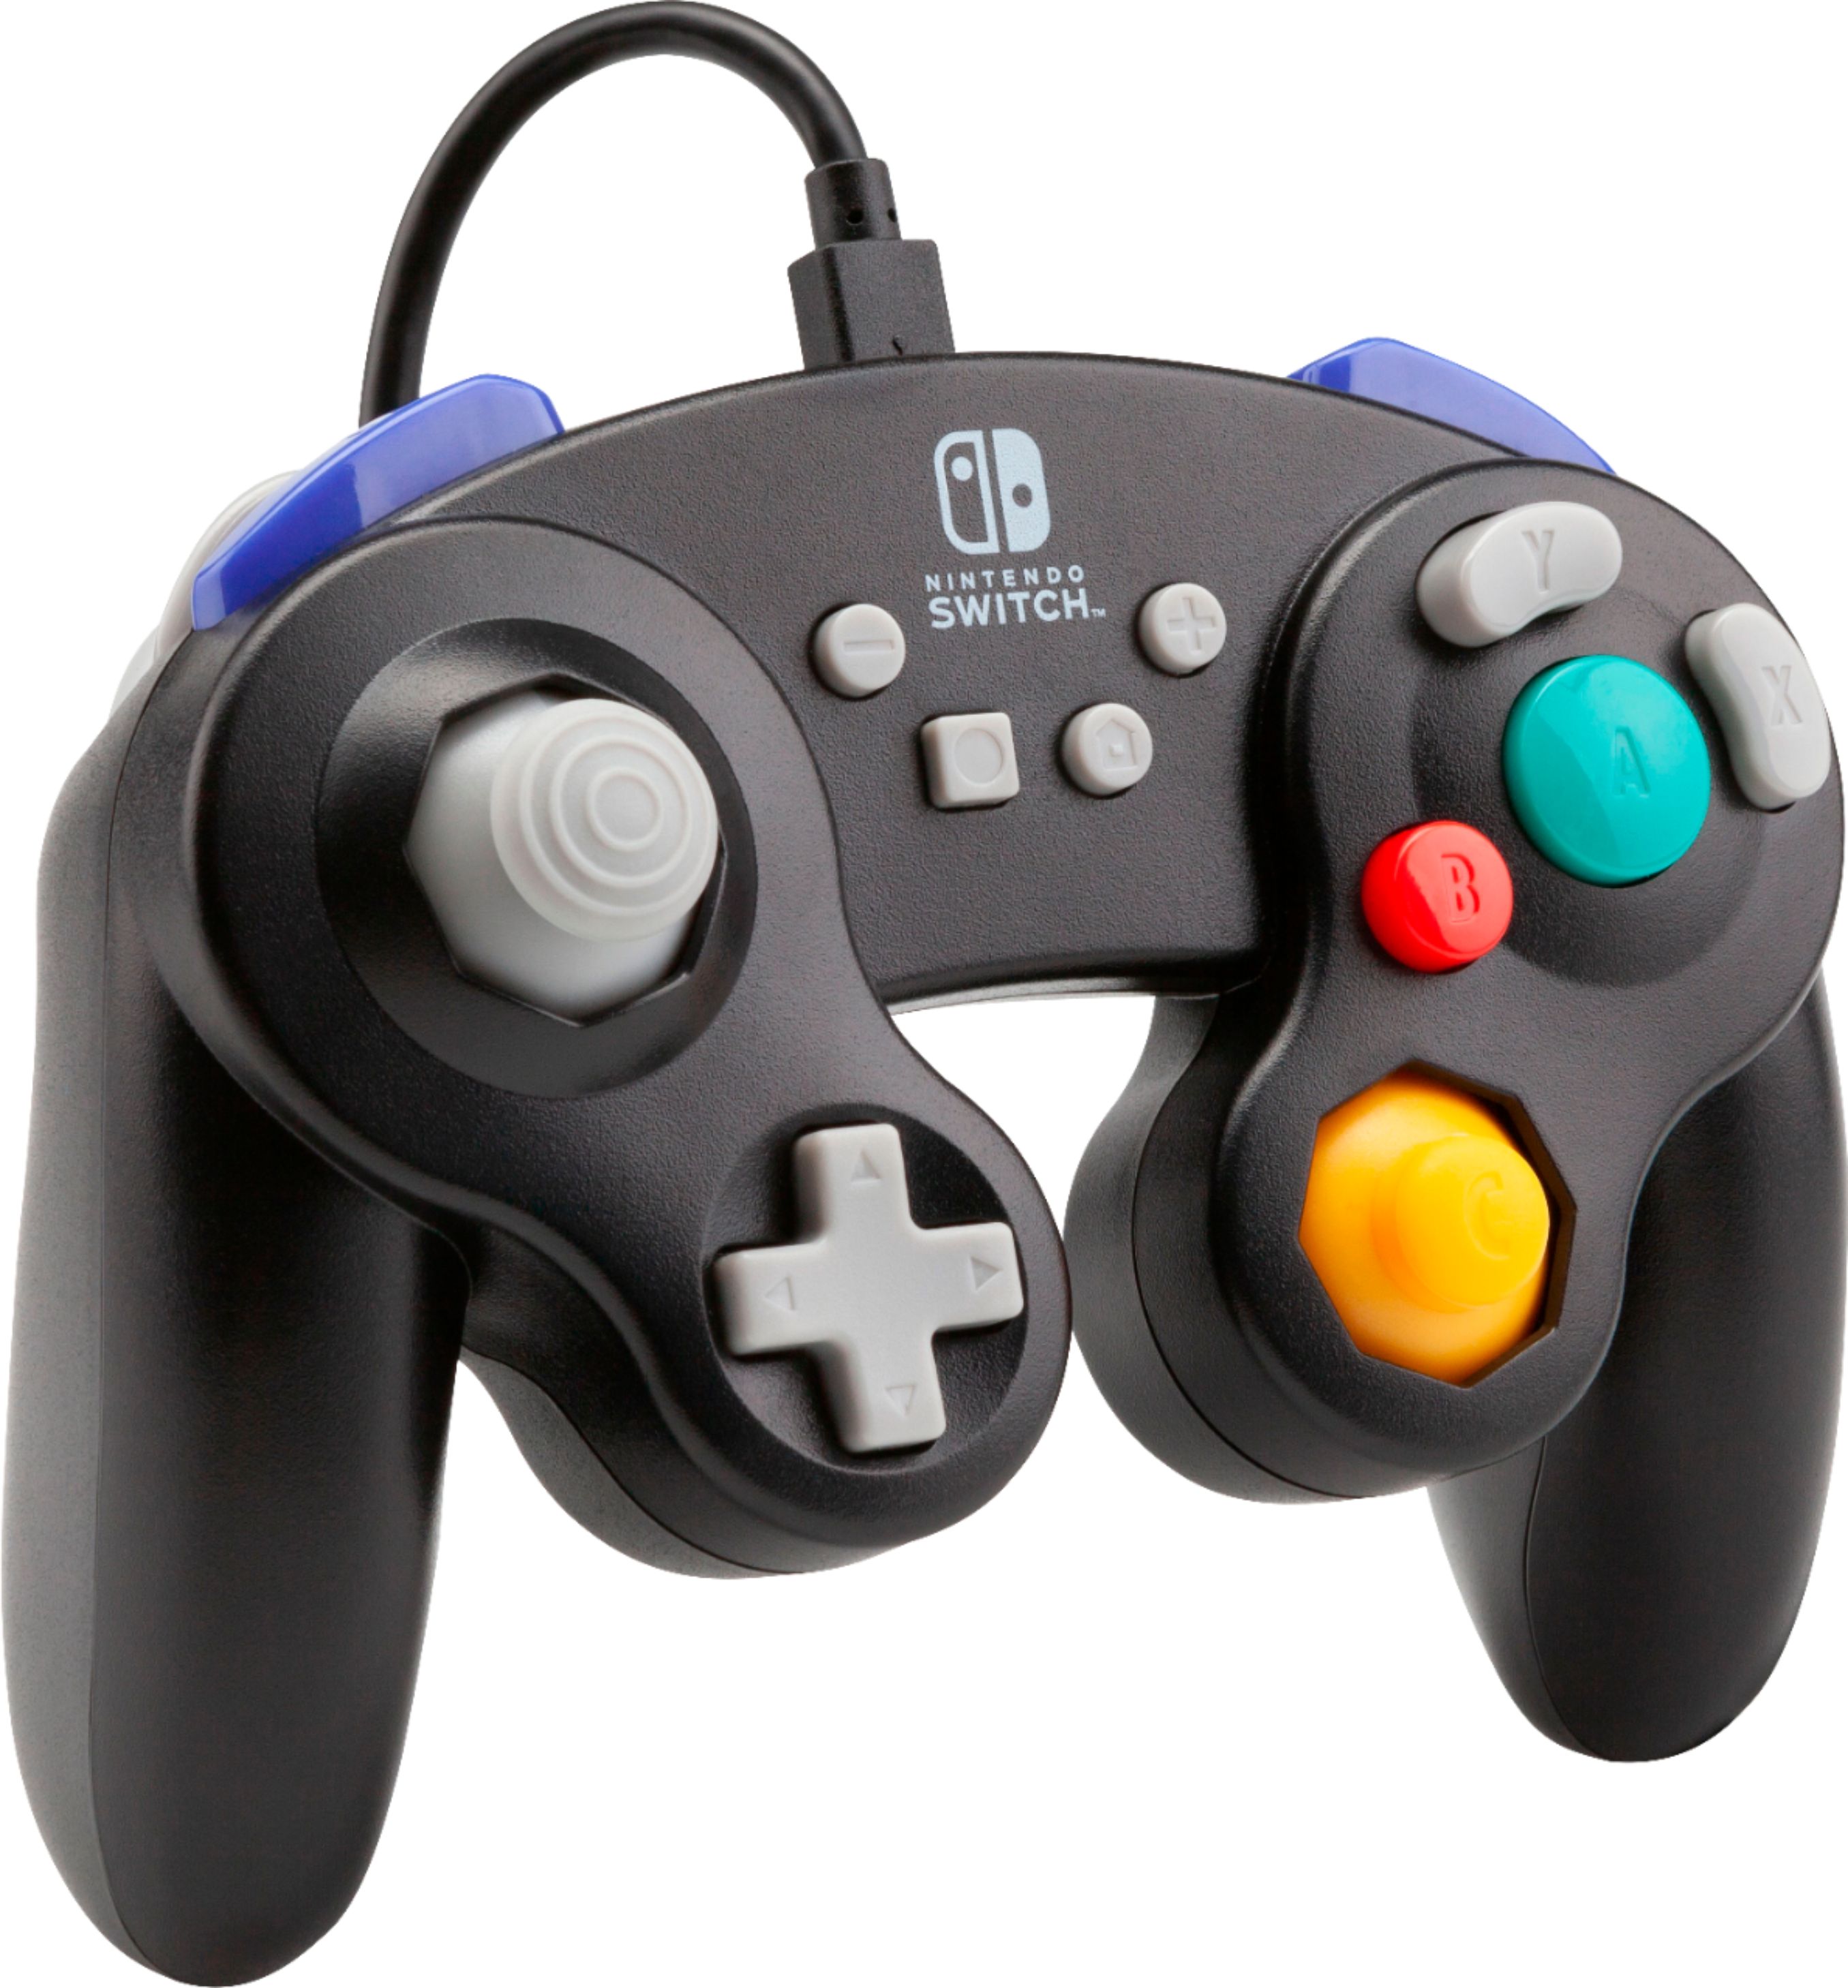 Angle View: PowerA - GameCube Style Wired Controller for Nintendo Switch - Wired: Black